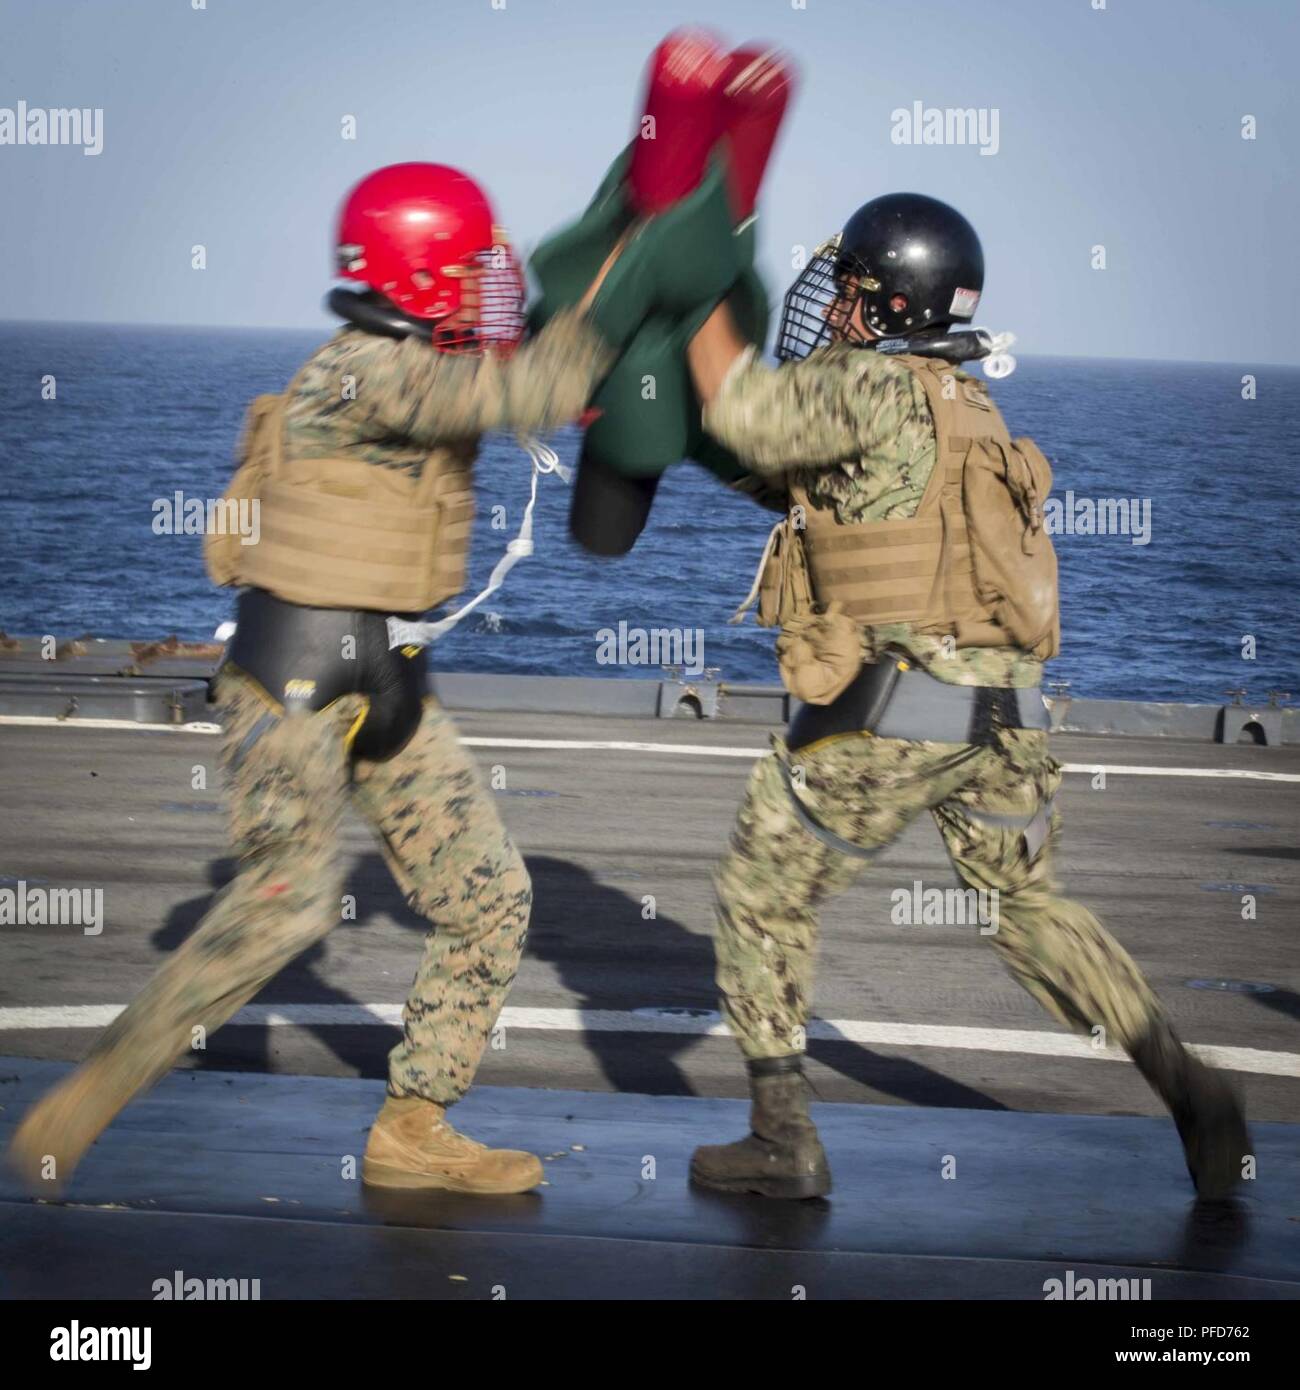 U.S. Marine Lance Cpl. Michael Mitchell, left, a landing support specialist with Combat Logistics Battalion 13, 13th Marine Expeditionary Unit (MEU), and U.S. Navy Seaman Mack Canady, right, square off while at sea during a pugil sticks match aboard the Whidbey Island-class dock landing ship USS Rushmore (LSD 47), June 8, 2018. The Essex Amphibious Ready Group (ARG) and 13th MEU are conducting Composite Training Unit Exercise (COMPTUEX), the final exercise before the units’ upcoming deployment. This exercise validates the ARG/MEU team’s ability to adapt and execute missions in ever-changing, u Stock Photo